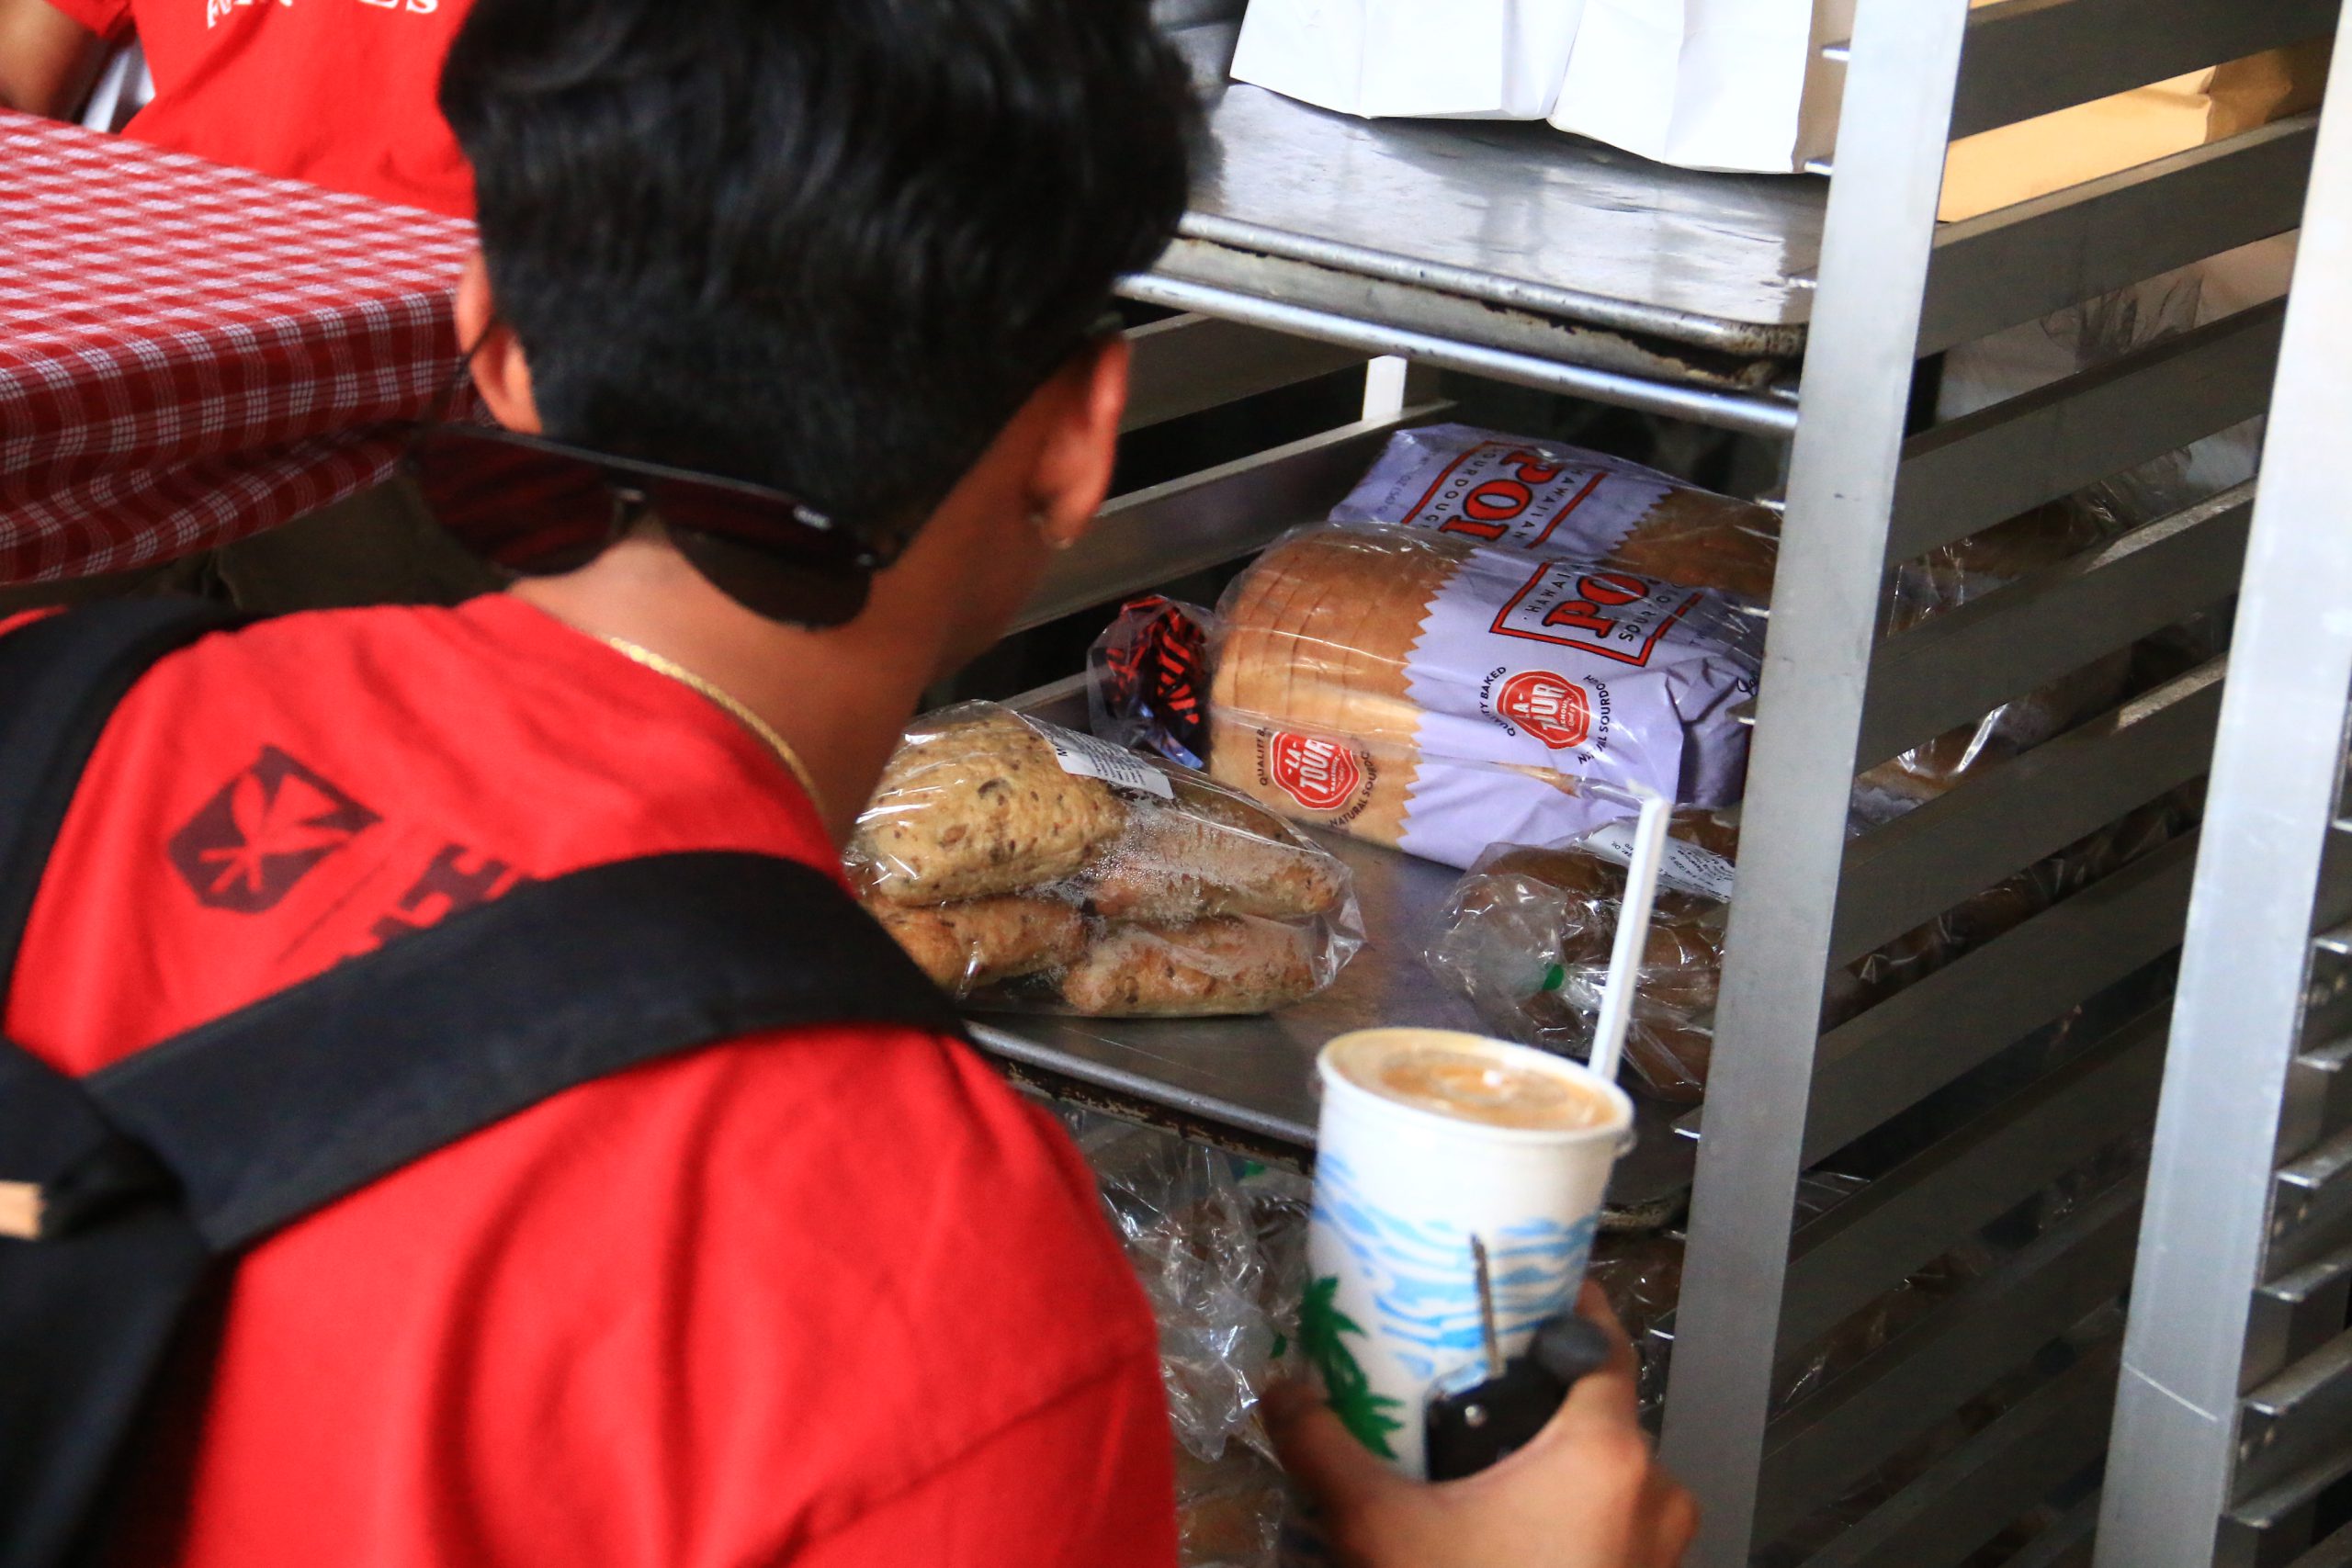 A student looks at a display of breads.